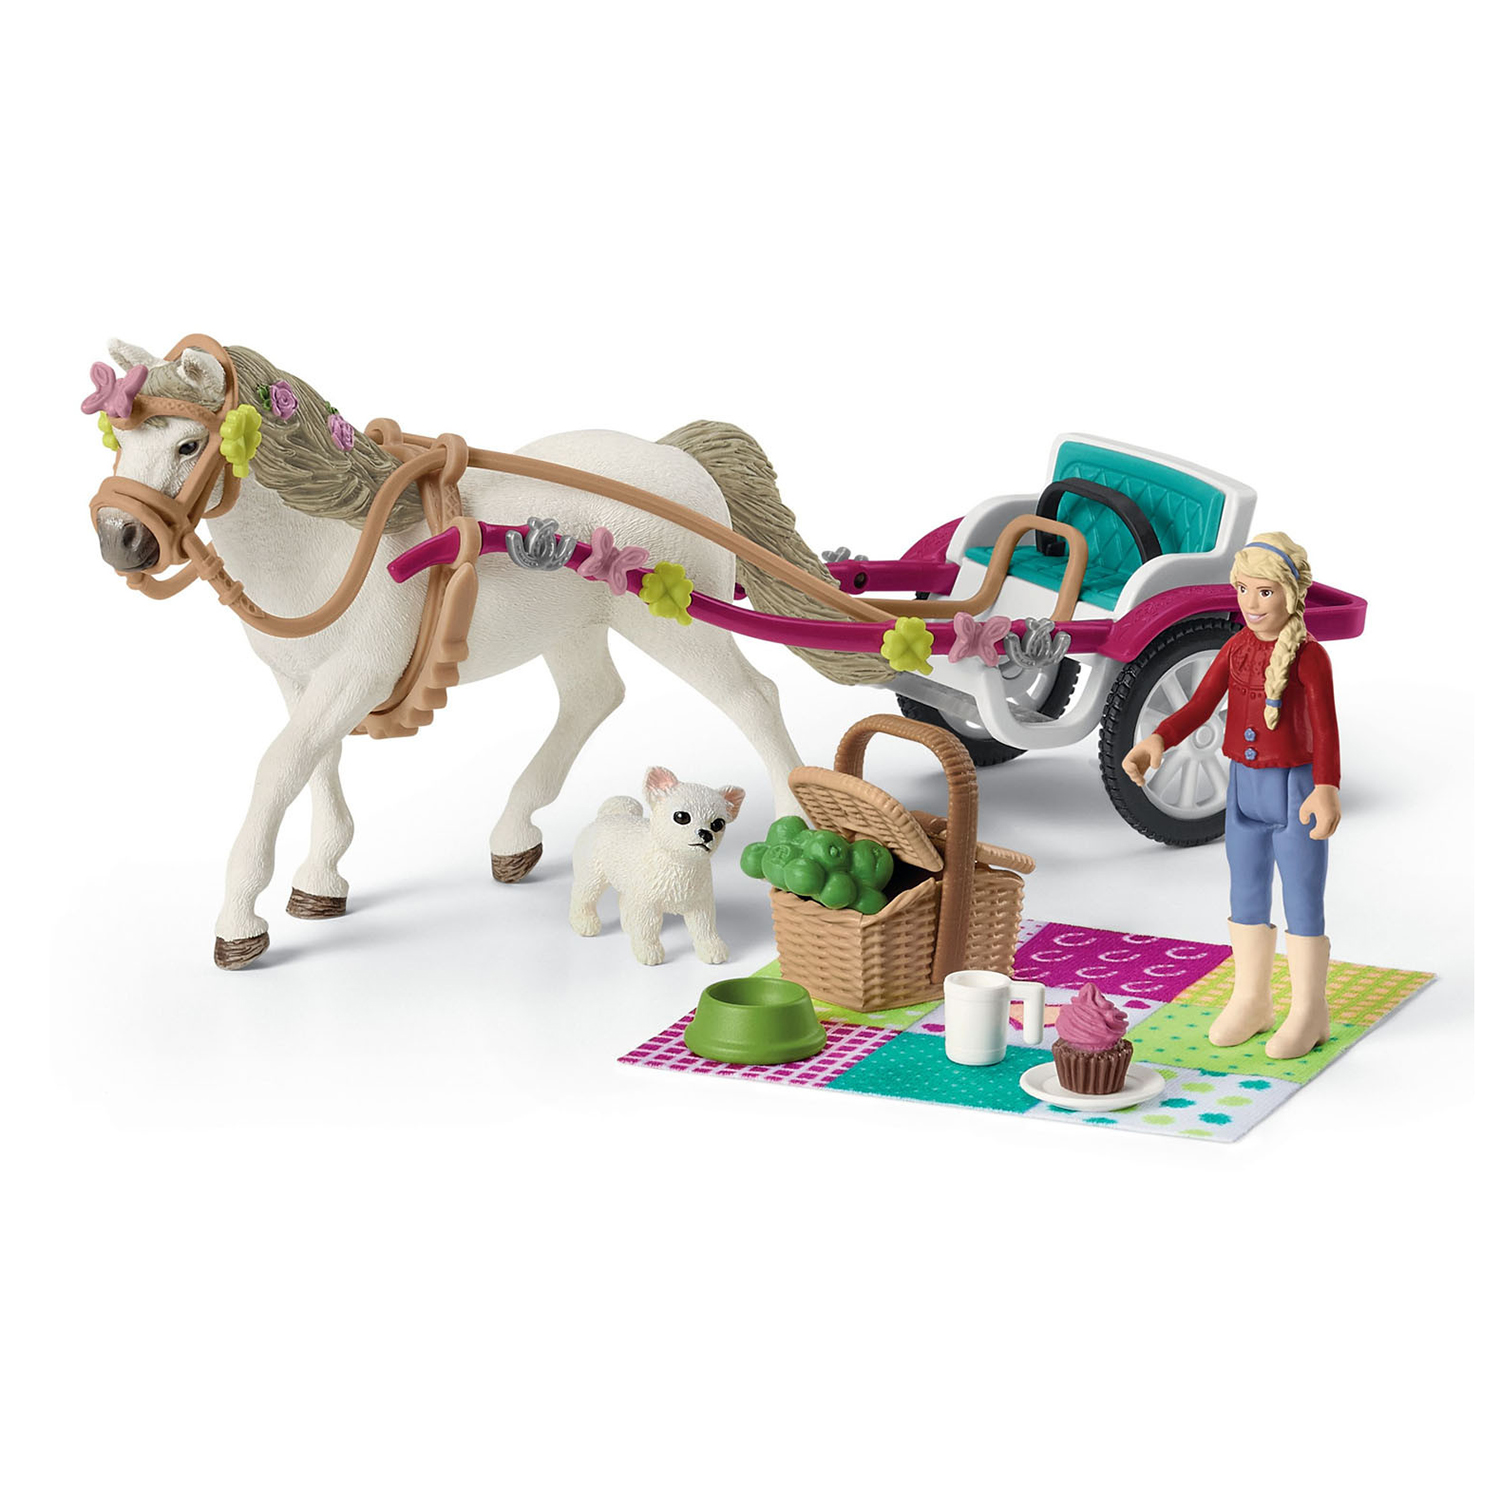 Small carrige for big horse show schleich